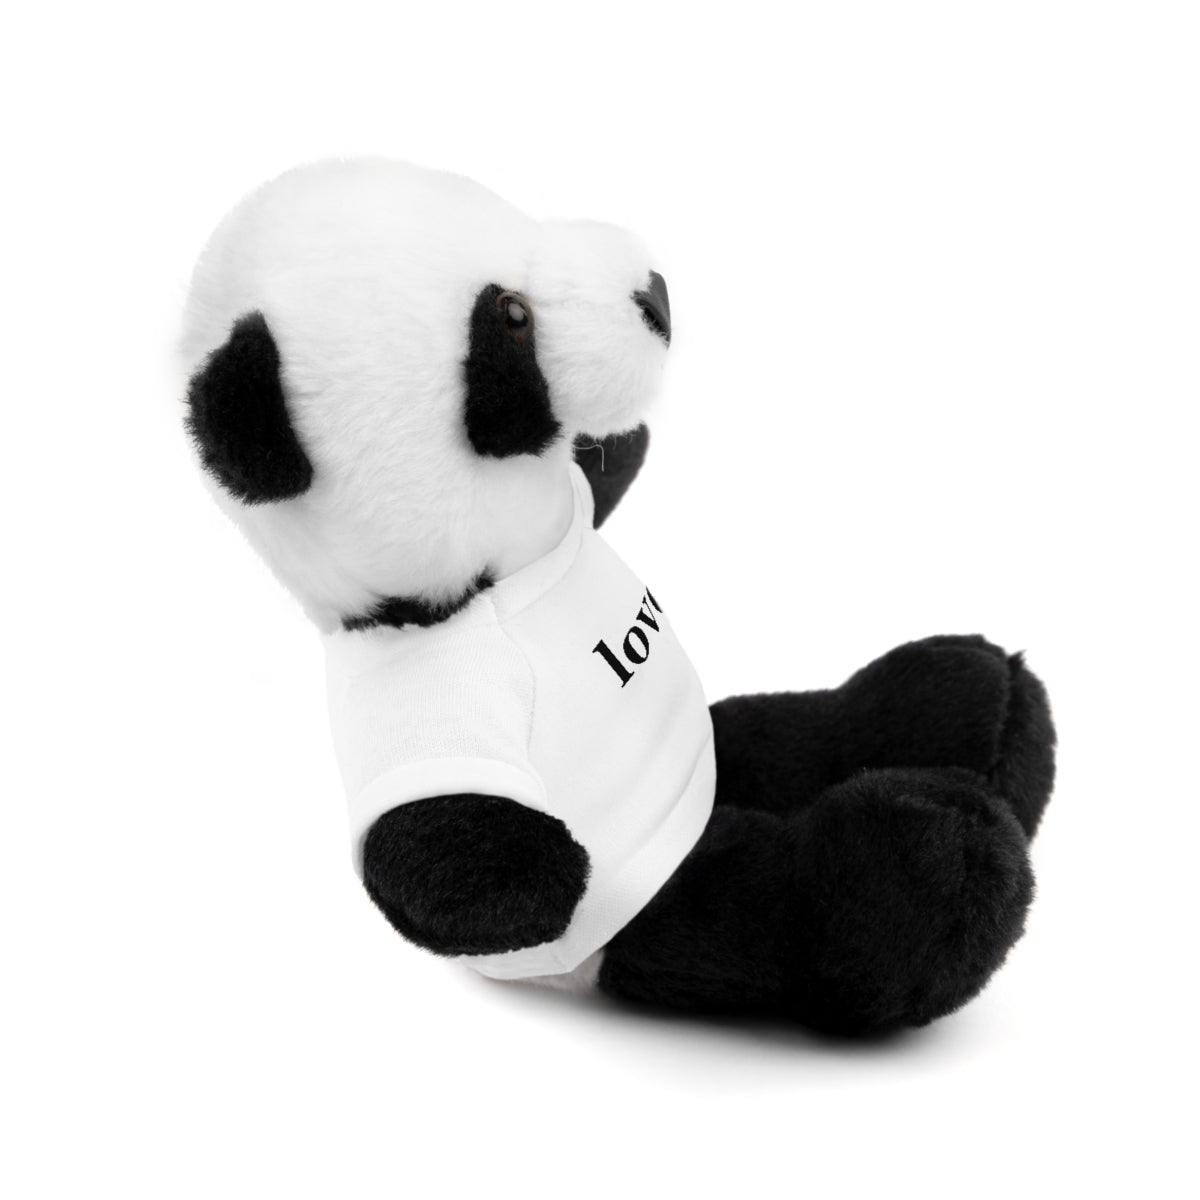 word love. - stuffed plushie animal with "loved." design tee (6 different animals to choose from)